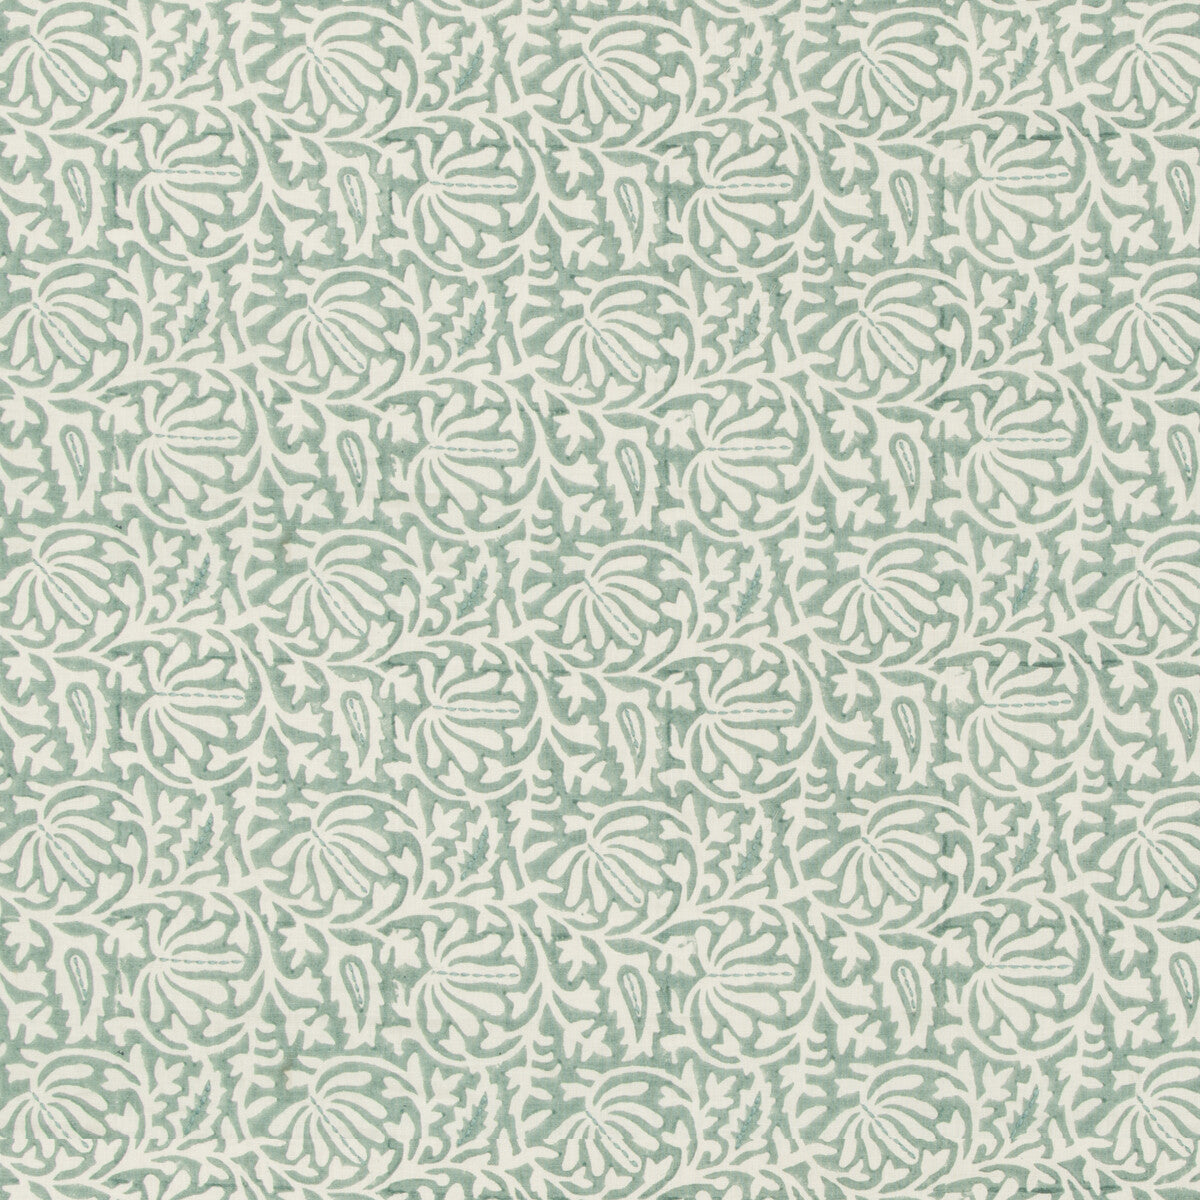 Laine Print fabric in pacific color - pattern 2017169.13.0 - by Lee Jofa in the Westport collection